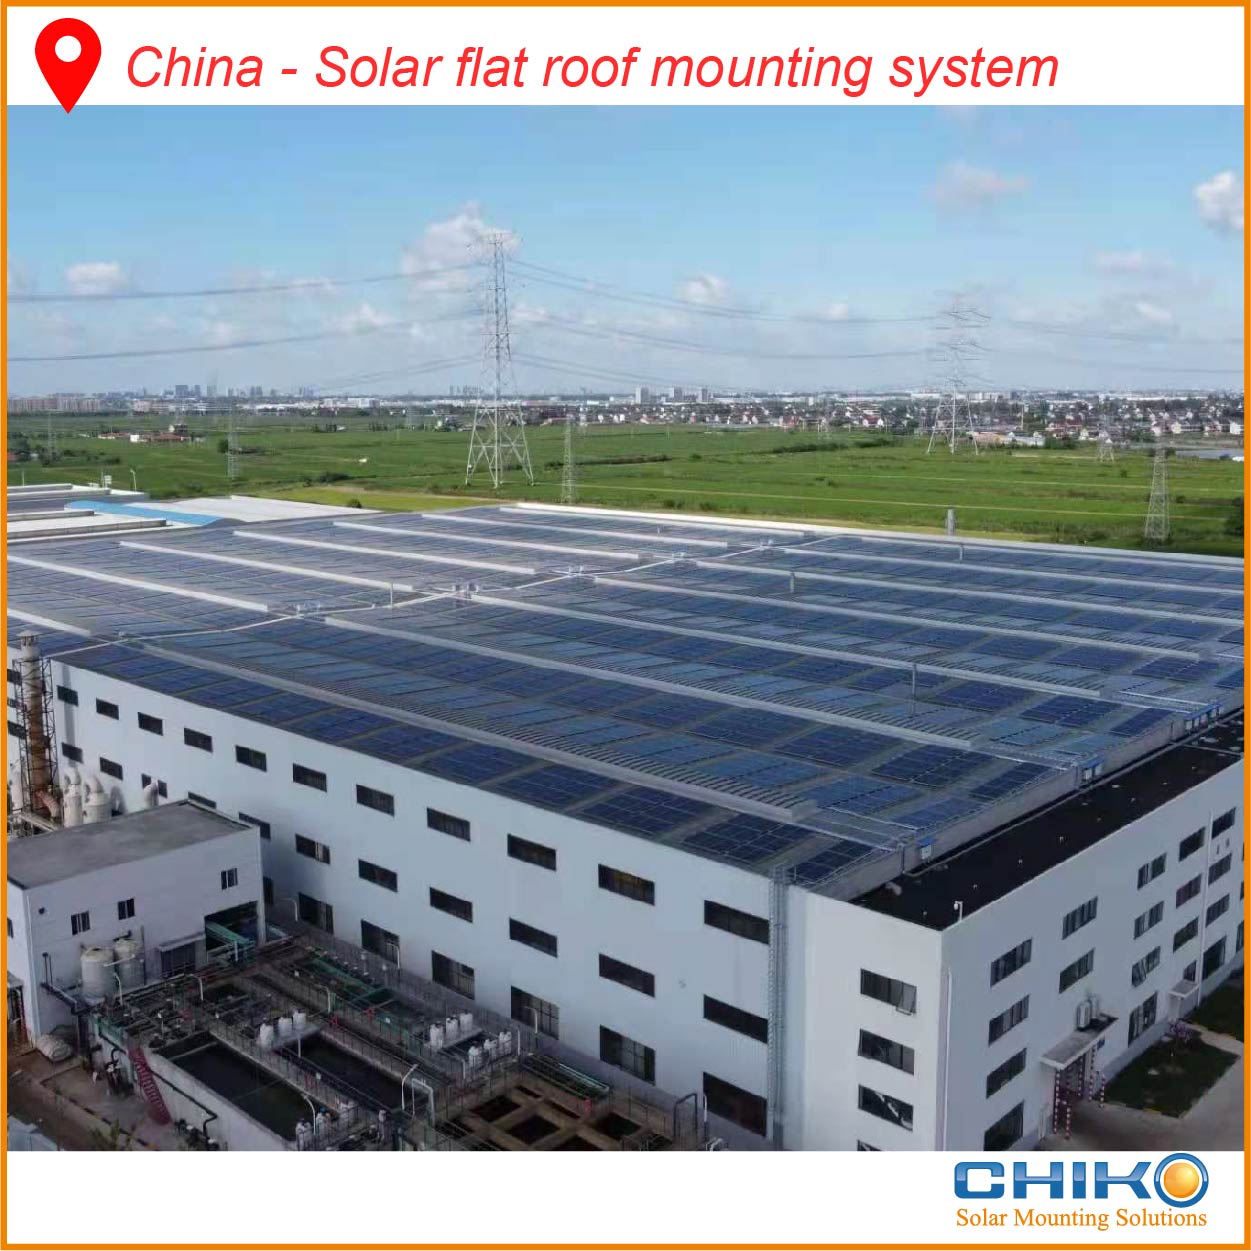 Attentions of waterproof on solar mounting installation, what you know? 